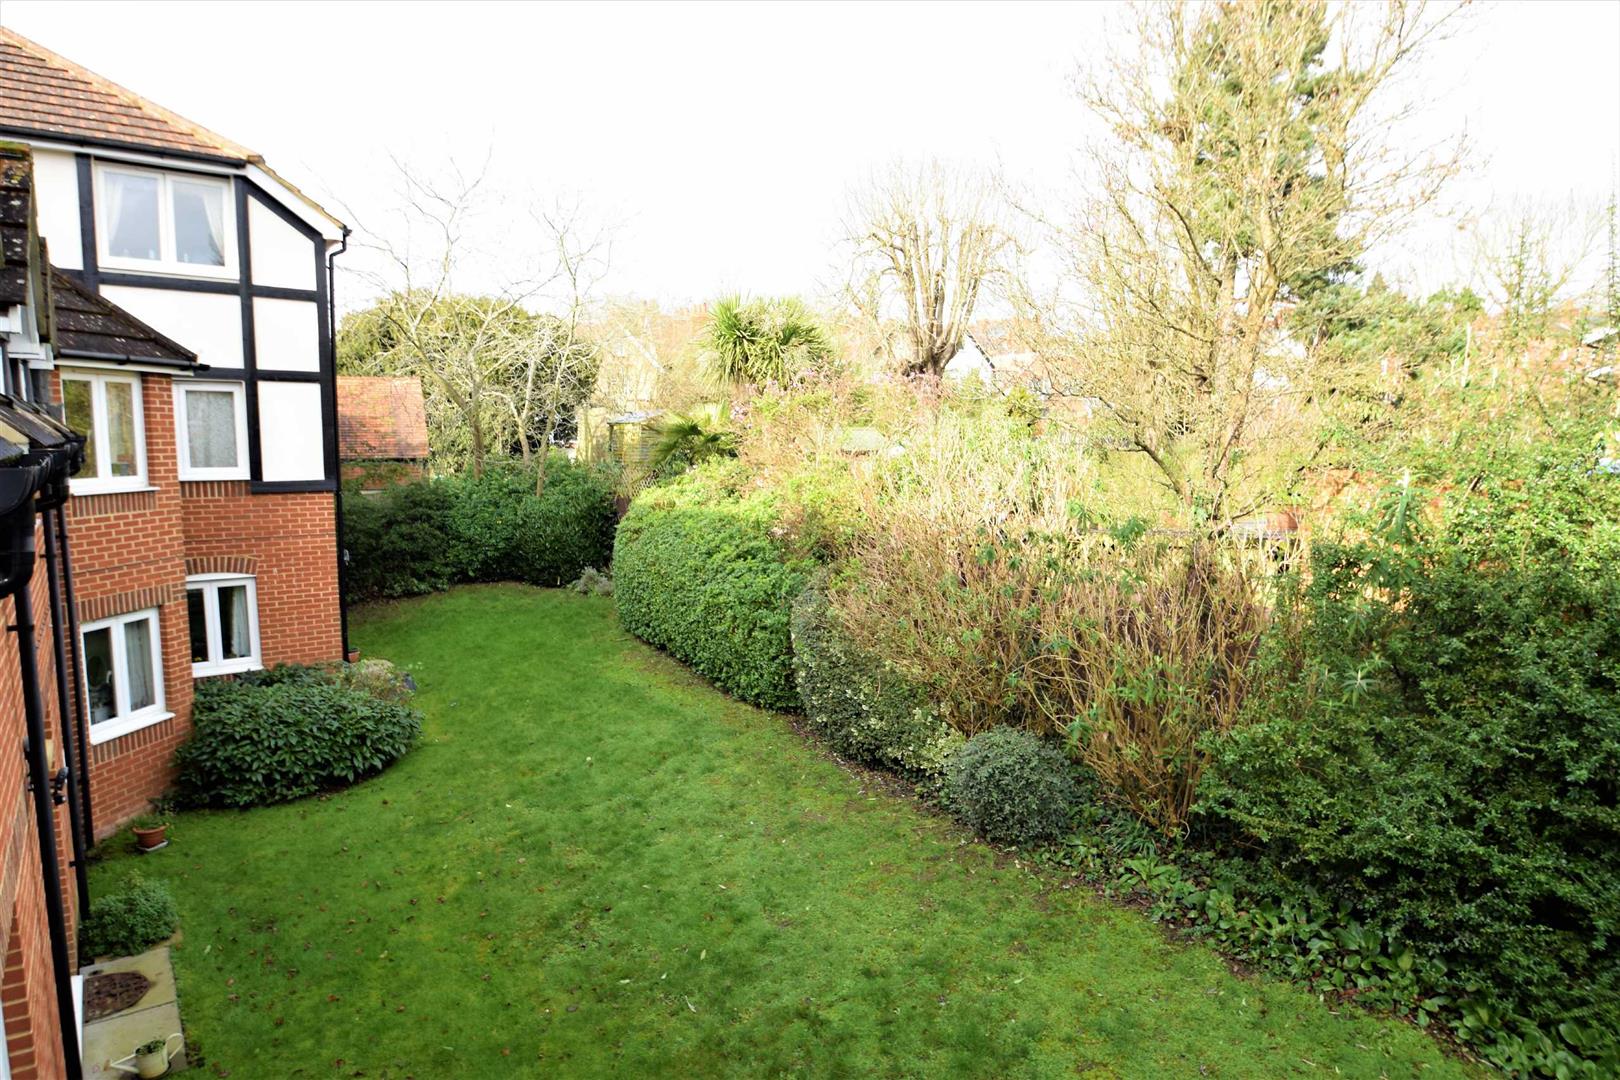 Priory Court Priory Avenue Caversham house for sale in Reading